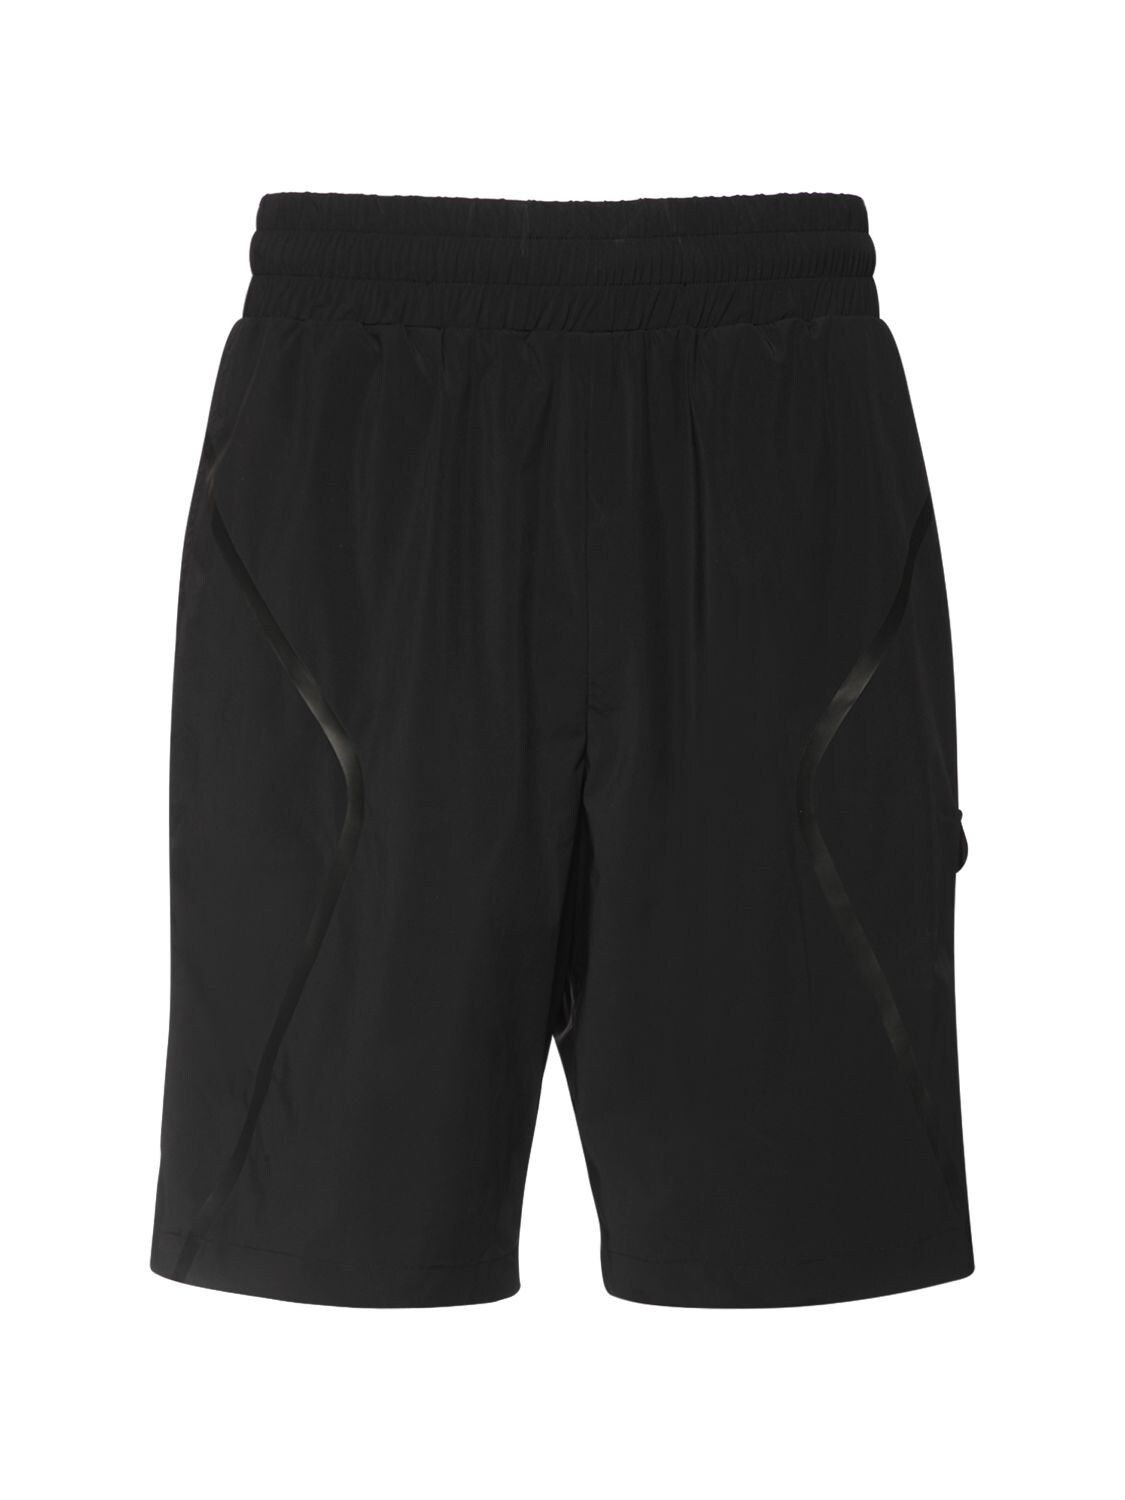 A-COLD-WALL* WELDED STRETCH TECH SHORTS,73IIW0003-QKXBQ0S1